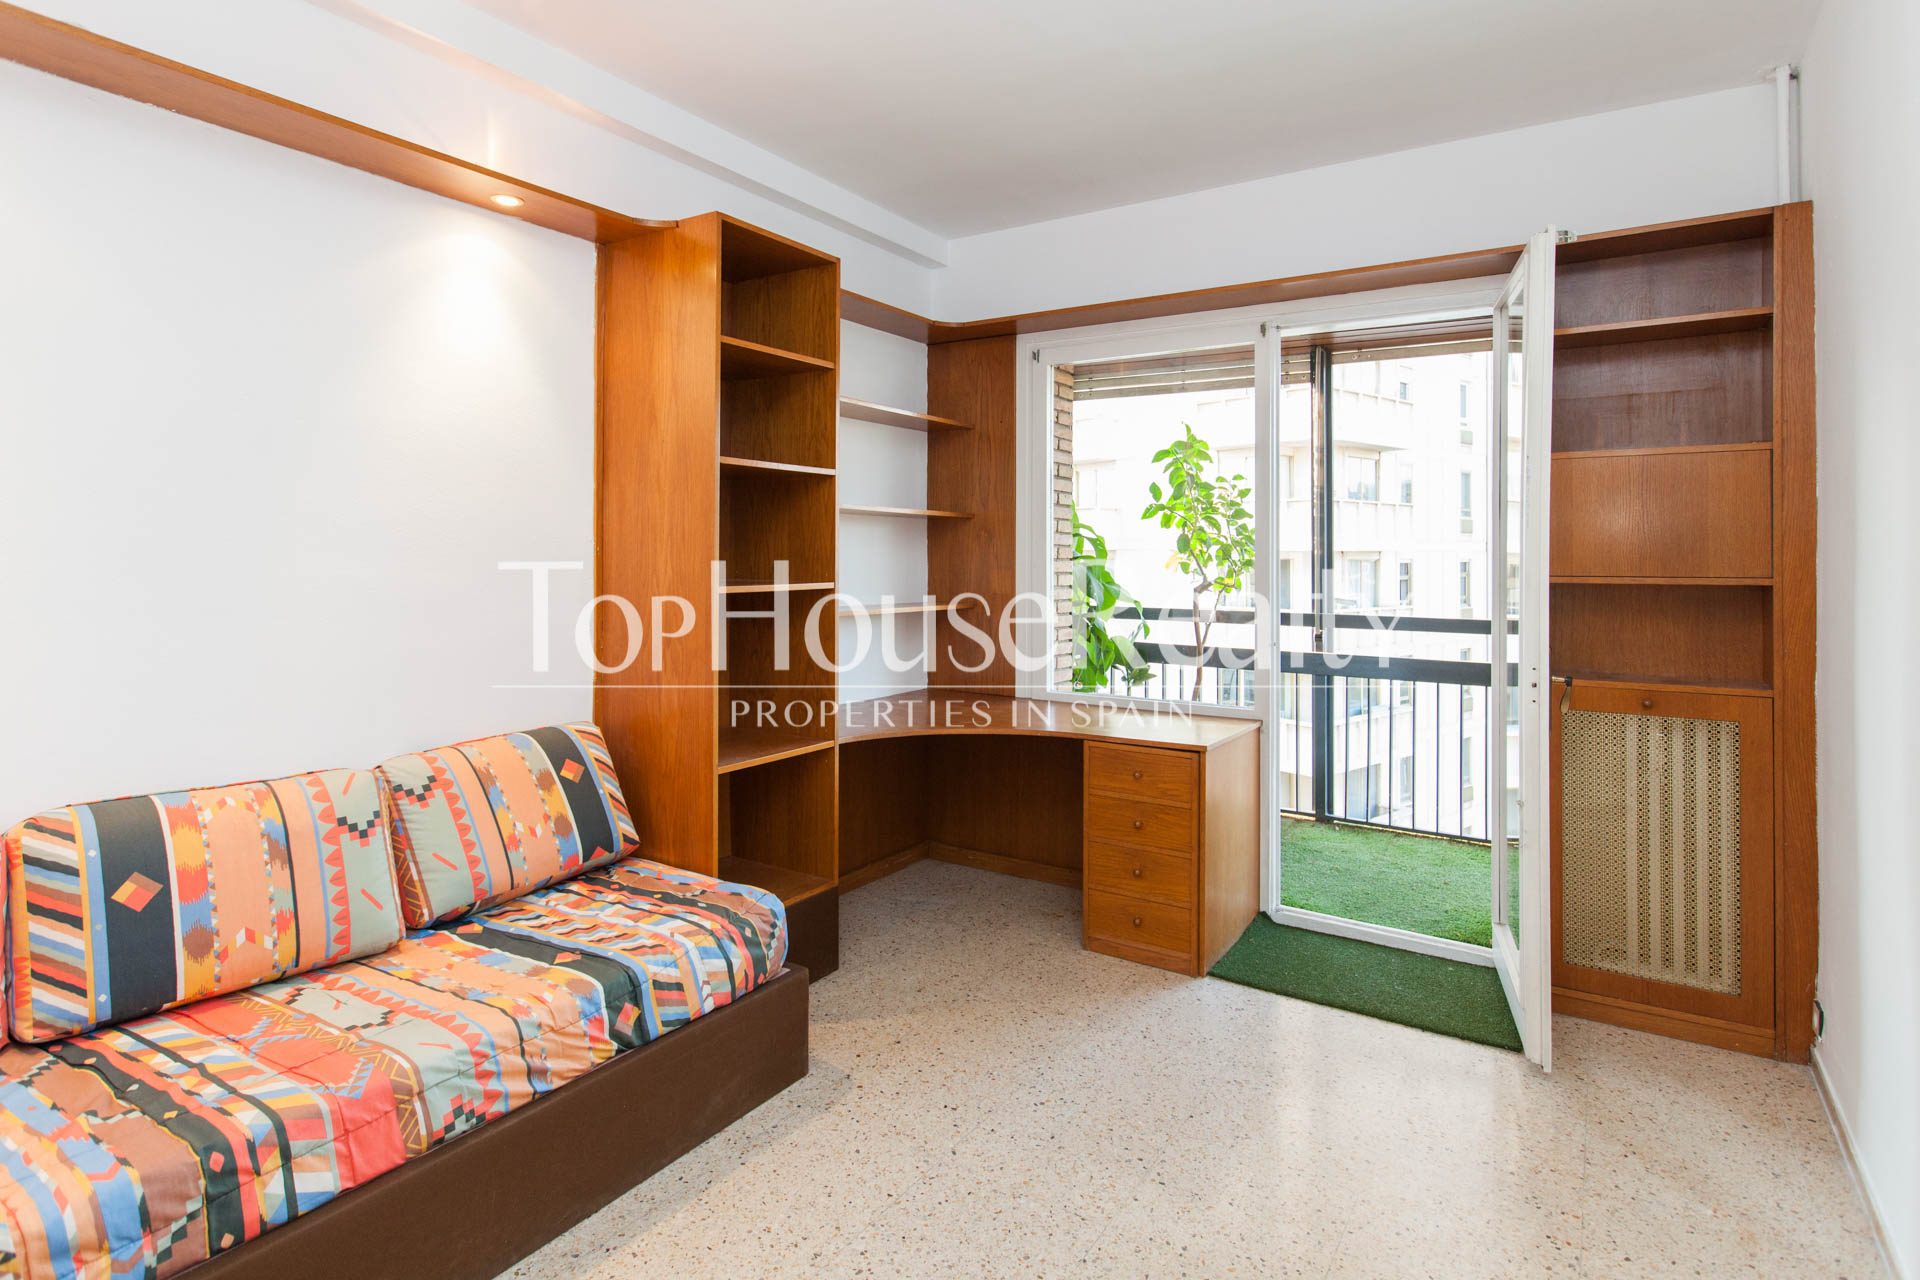 Incredible property in one of the best areas of Barcelona.